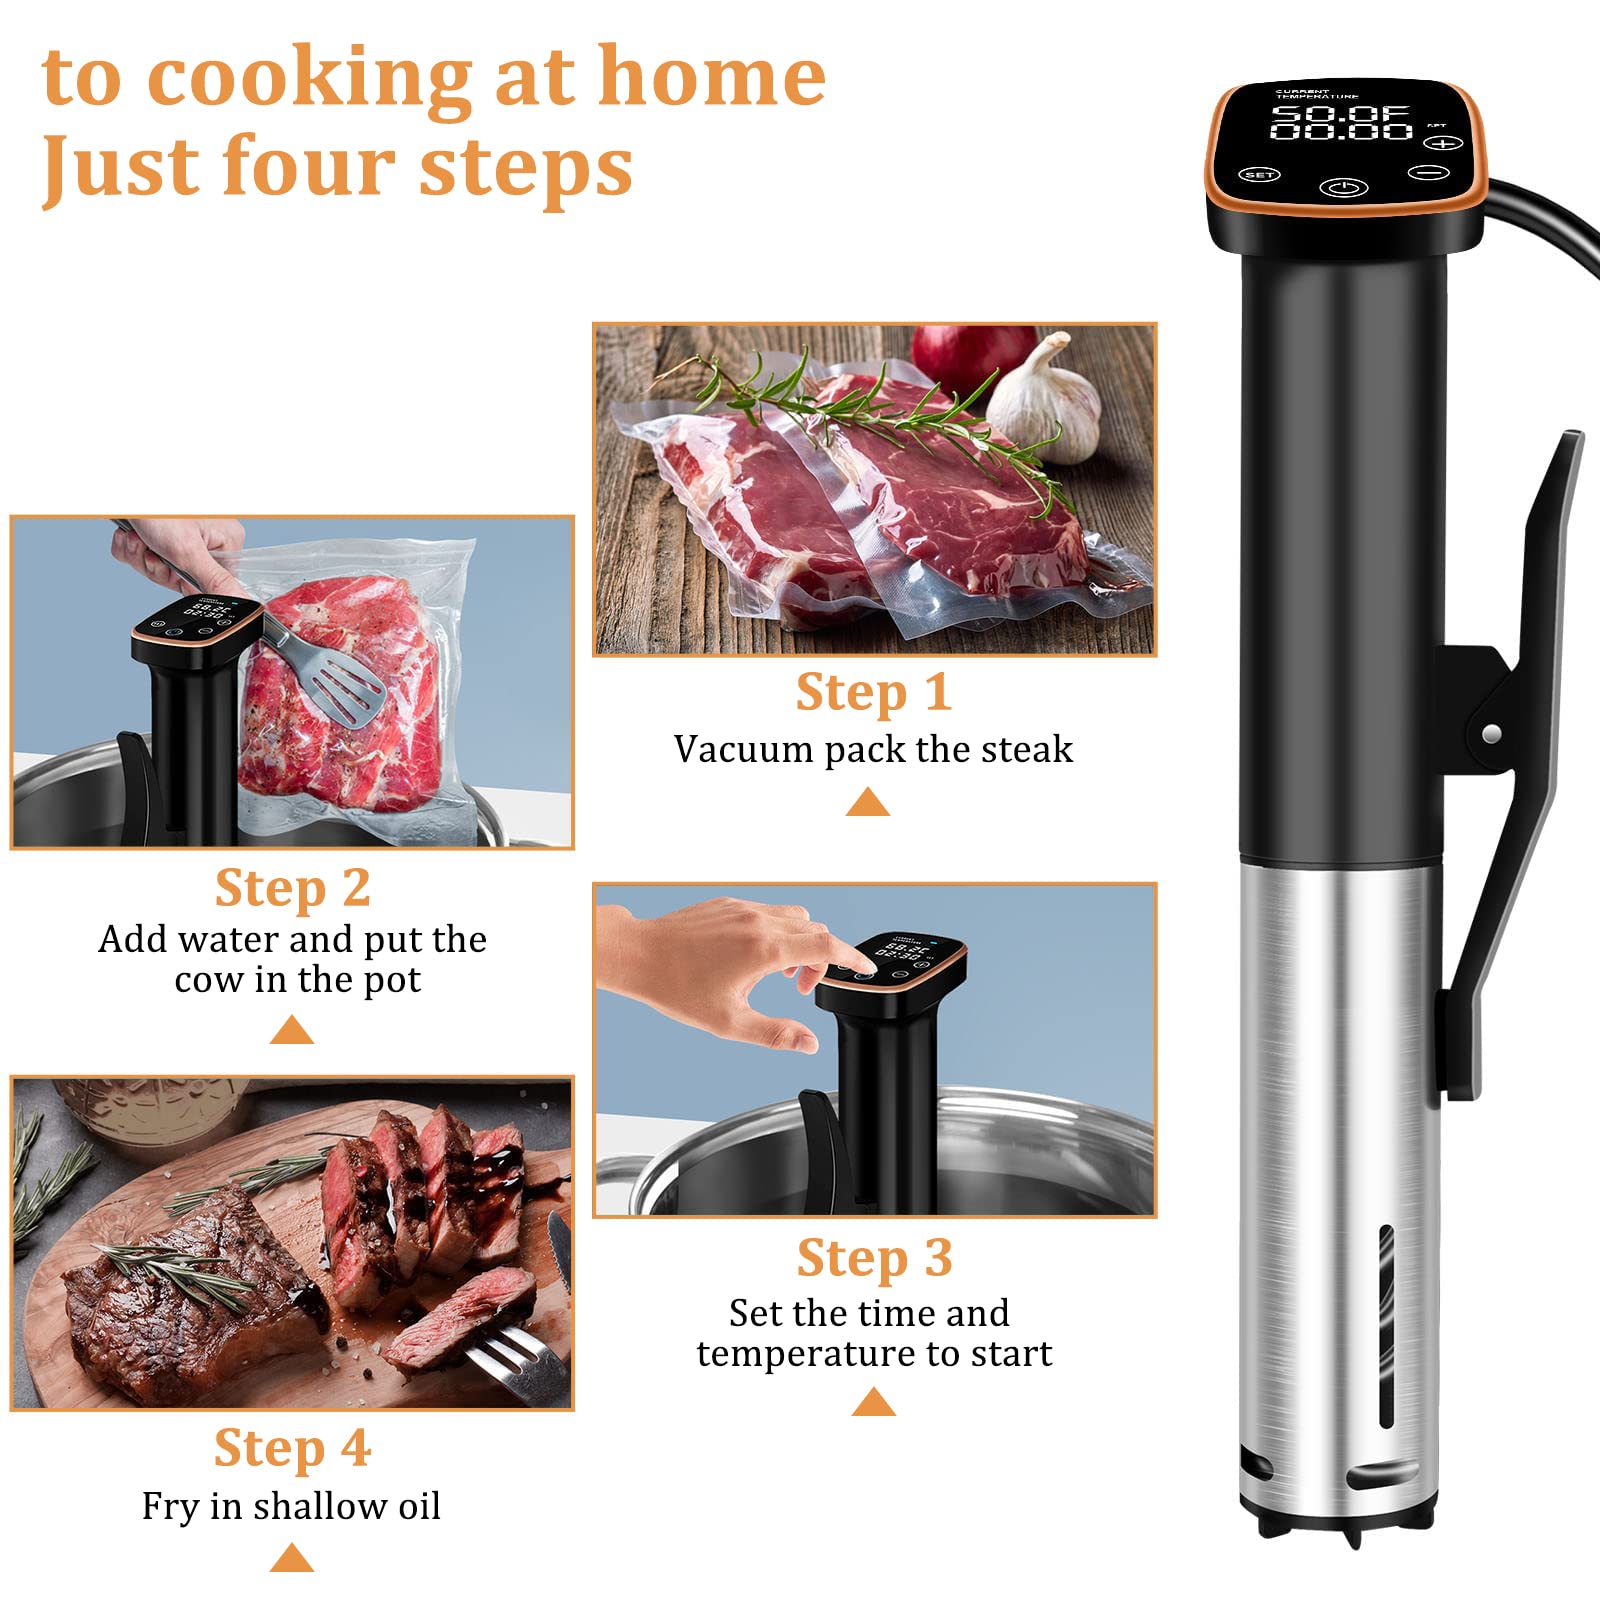 Sixfivsevn Sous Vide Cooker, Sous Vide Machine 1100 W, Immersion Circulator Precisional Cooker with Touch Control, Accurate Temperature, Ultra-quiet, IPX7 Waterproof, Fast Heating and Time Control